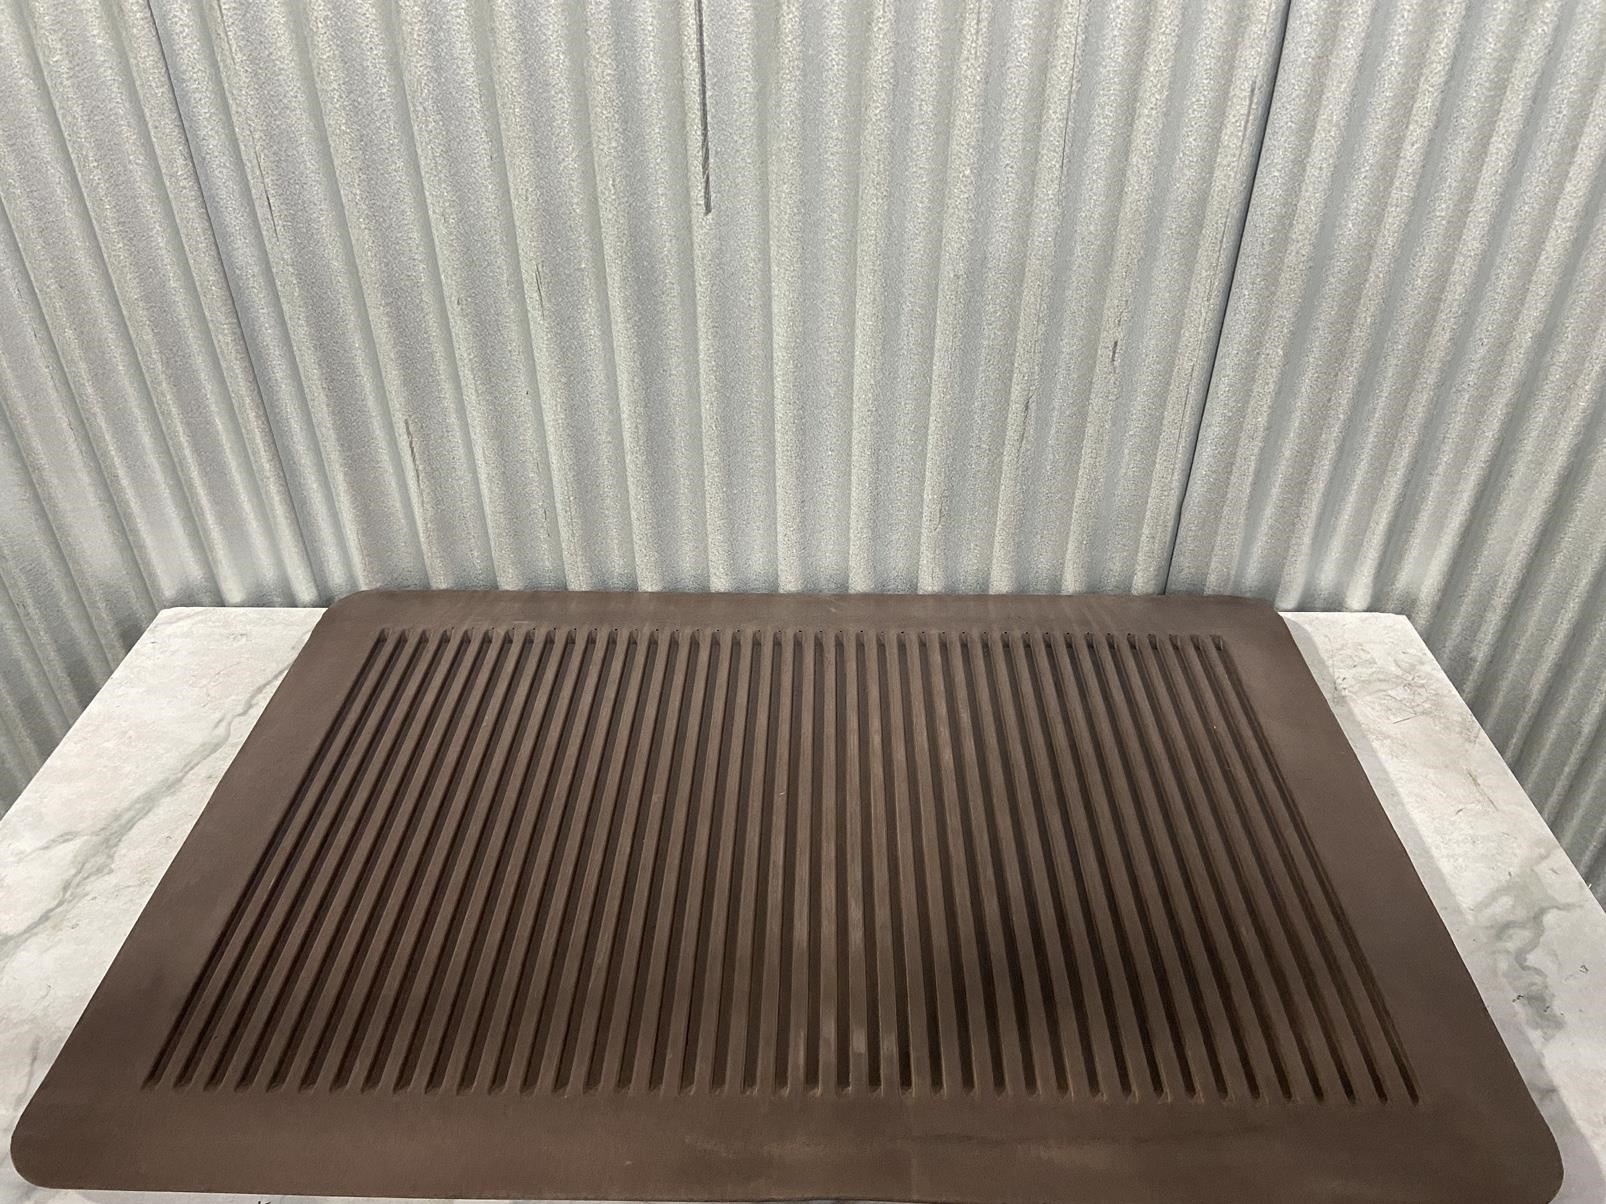 Thick Foam Mat 3’x5’ Brown With Ridges